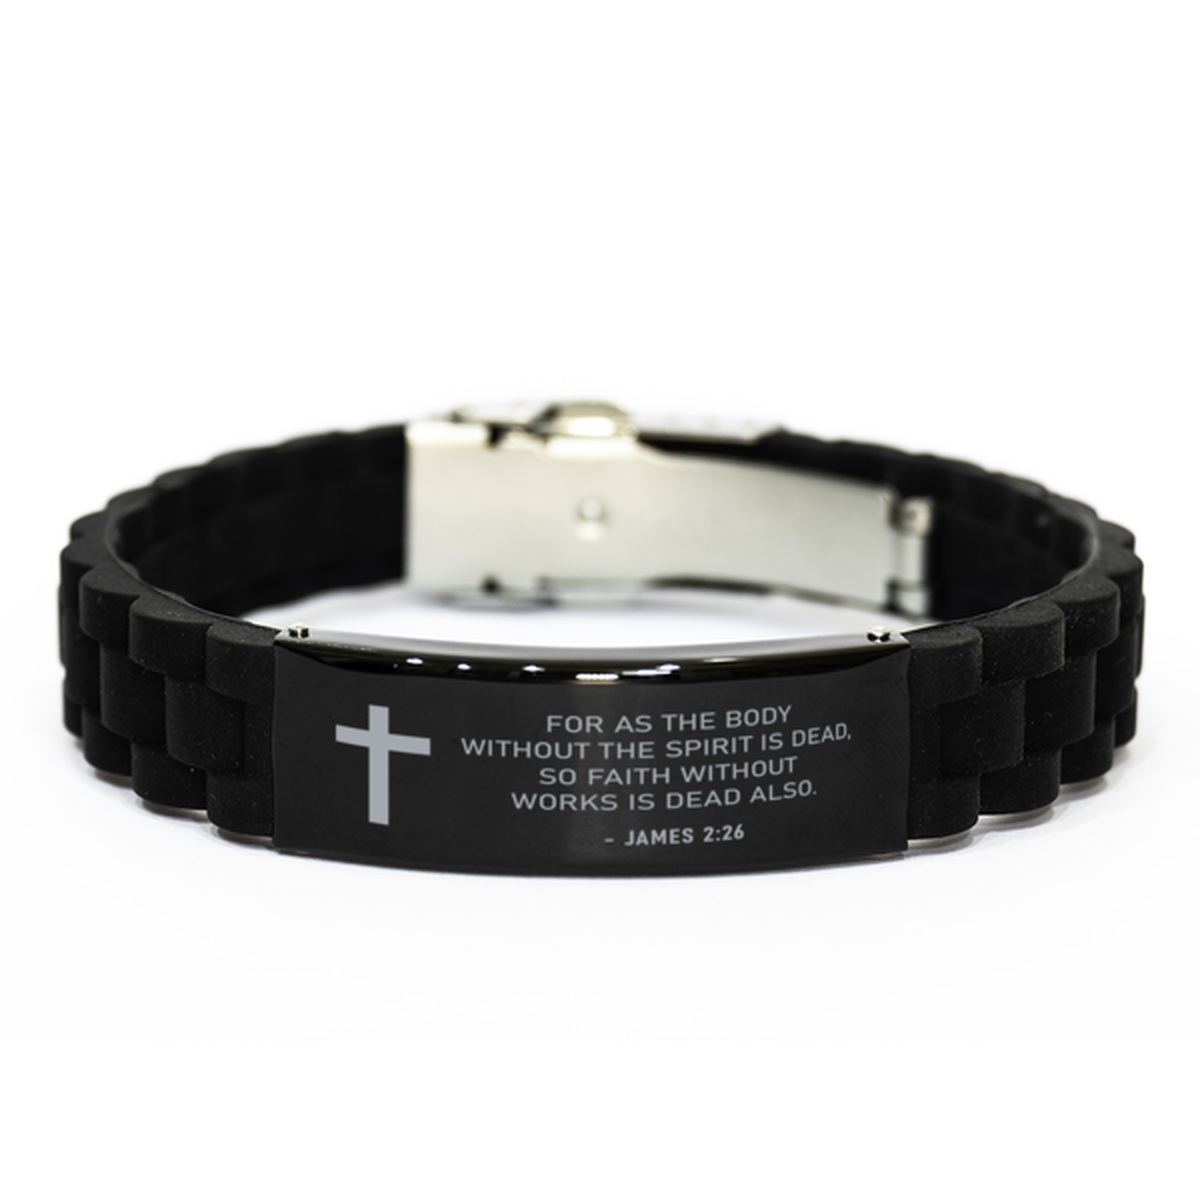 Bible Verse Black Bracelet,, James 2:26 For As The Body Without The Spirit Is Dead, So, Inspirational Christian Gifts For Men Women